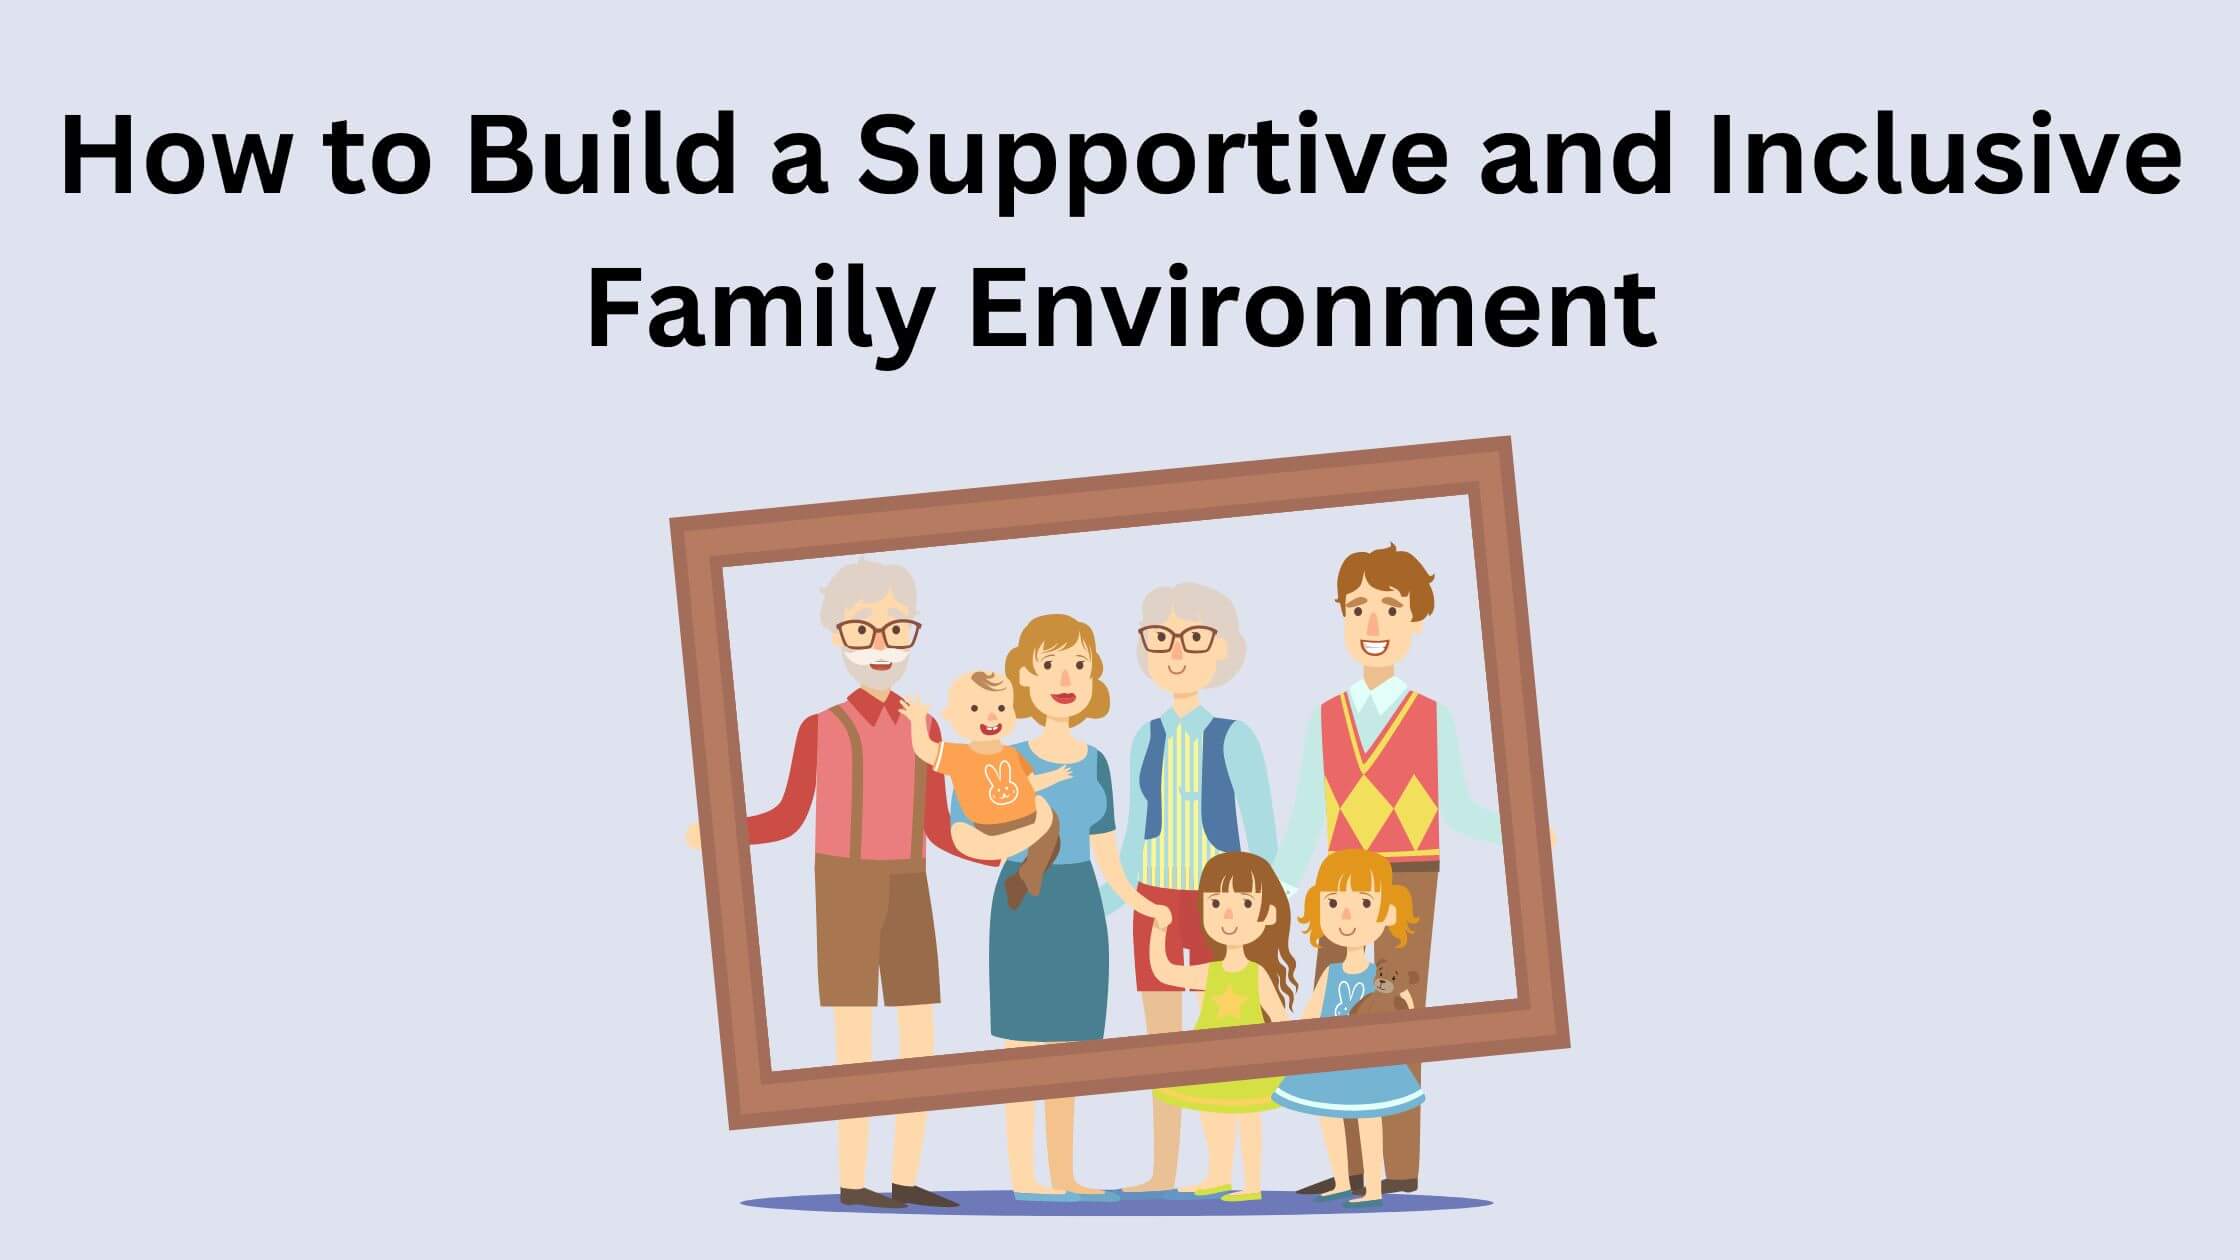 How to build a supportive and inclusive family environment